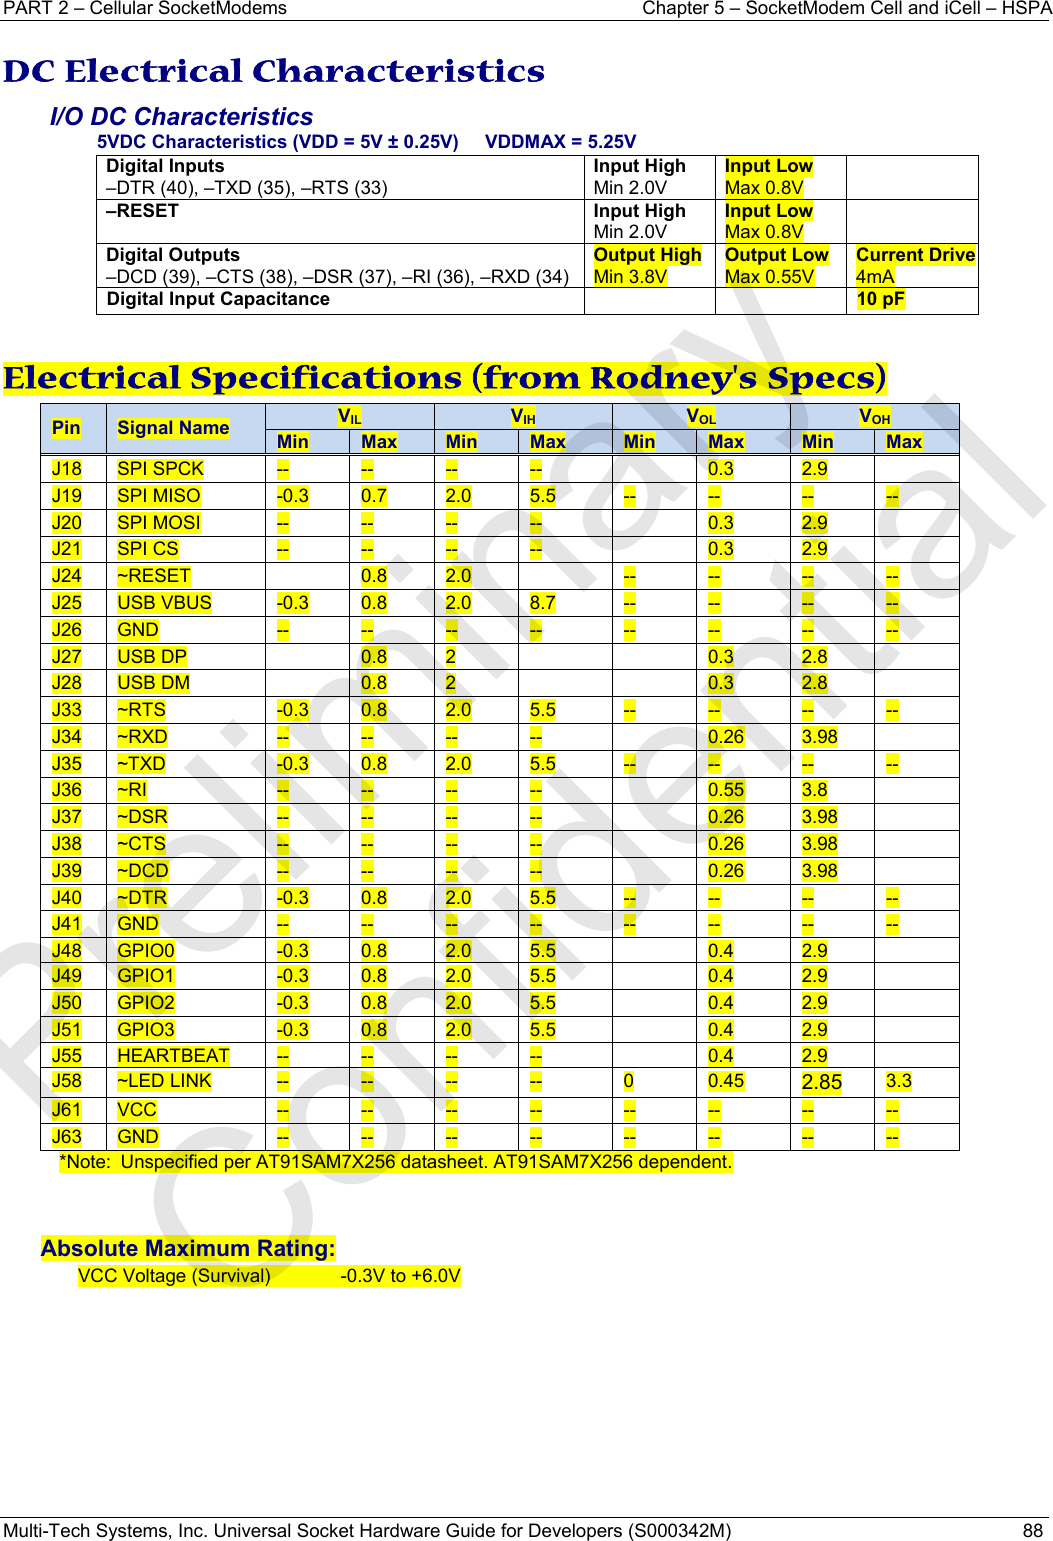 PART 2 – Cellular SocketModems  Chapter 5 – SocketModem Cell and iCell – HSPA Multi-Tech Systems, Inc. Universal Socket Hardware Guide for Developers (S000342M)  88  DC Electrical Characteristics I/O DC Characteristics 5VDC Characteristics (VDD = 5V ± 0.25V)     VDDMAX = 5.25V   Digital Inputs –DTR (40), –TXD (35), –RTS (33) Input HighMin 2.0VInput Low Max 0.8V  –RESET   Input HighMin 2.0V Input Low Max 0.8V  Digital Outputs –DCD (39), –CTS (38), –DSR (37), –RI (36), –RXD (34)Output HighMin 3.8VOutput Low Max 0.55V Current Drive 4mADigital Input Capacitance    10 pF   Electrical Specifications (from Rodney&apos;s Specs) Pin  Signal Name  VIL  VIH  VOL  VOH Min  Max  Min  Max  Min  Max  Min  Max J18  SPI SPCK  --  --  --  --   0.3  2.9  J19  SPI MISO  -0.3  0.7  2.0  5.5  --  --  --  -- J20  SPI MOSI  --  --  --  --   0.3  2.9  J21  SPI CS  --  --  --  --   0.3  2.9  J24  ~RESET  0.8  2.0   --  --  --  -- J25  USB VBUS  -0.3  0.8  2.0  8.7  --  --  --  -- J26  GND  --  --  --  --  --  --  --  -- J27  USB DP    0.8  2     0.3  2.8  J28  USB DM    0.8  2     0.3  2.8  J33  ~RTS  -0.3  0.8  2.0  5.5  --  --  --  -- J34  ~RXD  --  --  --  --   0.26  3.98  J35  ~TXD  -0.3  0.8  2.0  5.5  --  --  --  -- J36  ~RI  --  --  --  --   0.55  3.8  J37  ~DSR  --  --  --  --   0.26  3.98  J38  ~CTS  --  --  --  --   0.26  3.98  J39  ~DCD  --  --  --  --   0.26  3.98  J40  ~DTR  -0.3  0.8  2.0  5.5  --  --  --  -- J41  GND  --  --  --  --  --  --  --  -- J48  GPIO0  -0.3  0.8  2.0  5.5   0.4  2.9  J49  GPIO1  -0.3  0.8  2.0  5.5   0.4  2.9  J50  GPIO2  -0.3  0.8  2.0  5.5   0.4  2.9  J51  GPIO3  -0.3  0.8  2.0  5.5   0.4  2.9  J55  HEARTBEAT  --  --  --  --   0.4  2.9  J58  ~LED LINK  --  --  --  --  0  0.45  2.85  3.3 J61  VCC  --  --  --  --  --  --  --  -- J63  GND  --  --  --  --  --  --  --  -- *Note:  Unspecified per AT91SAM7X256 datasheet. AT91SAM7X256 dependent.   Absolute Maximum Rating: VCC Voltage (Survival)    -0.3V to +6.0V    Preliminary  Confidential